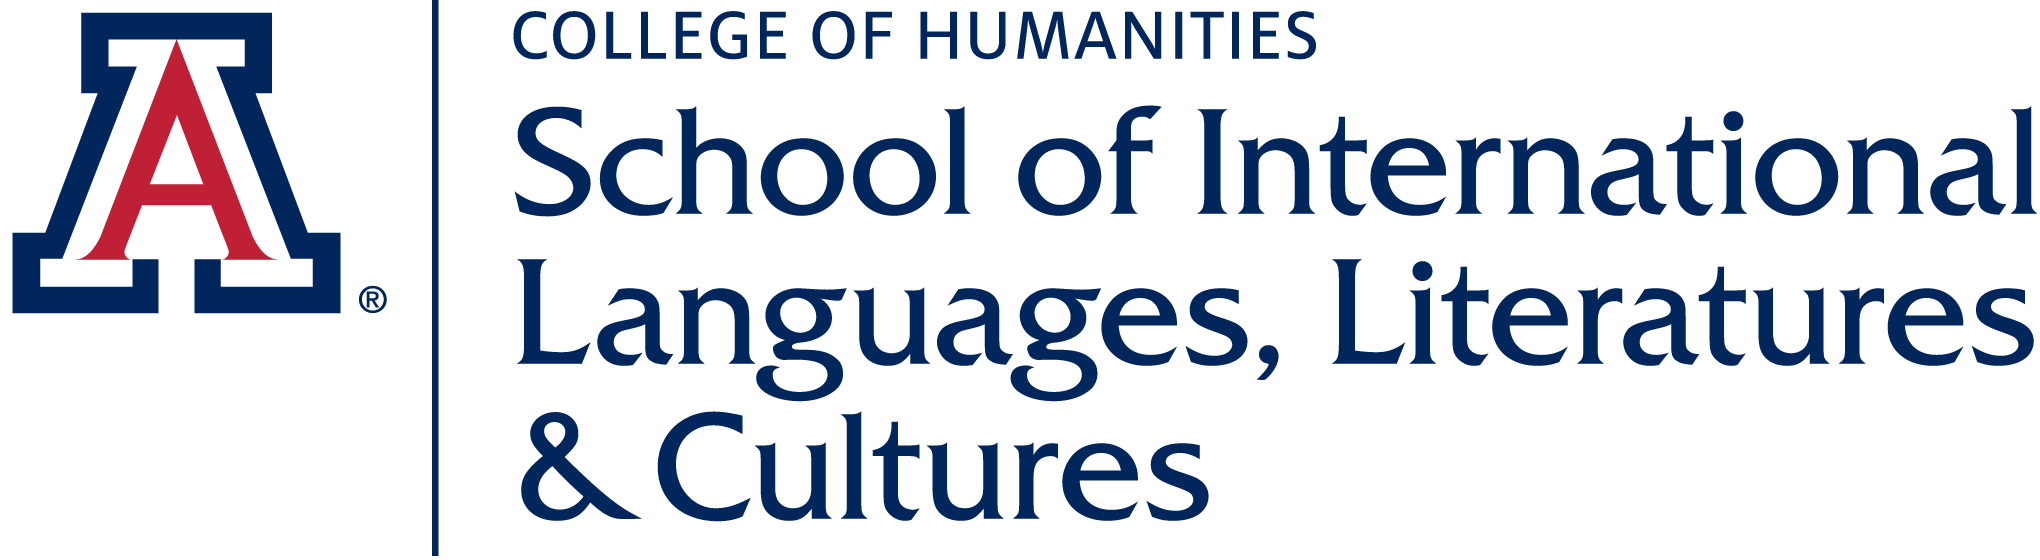 School of International Languages, Literatures, and Cultures | Home